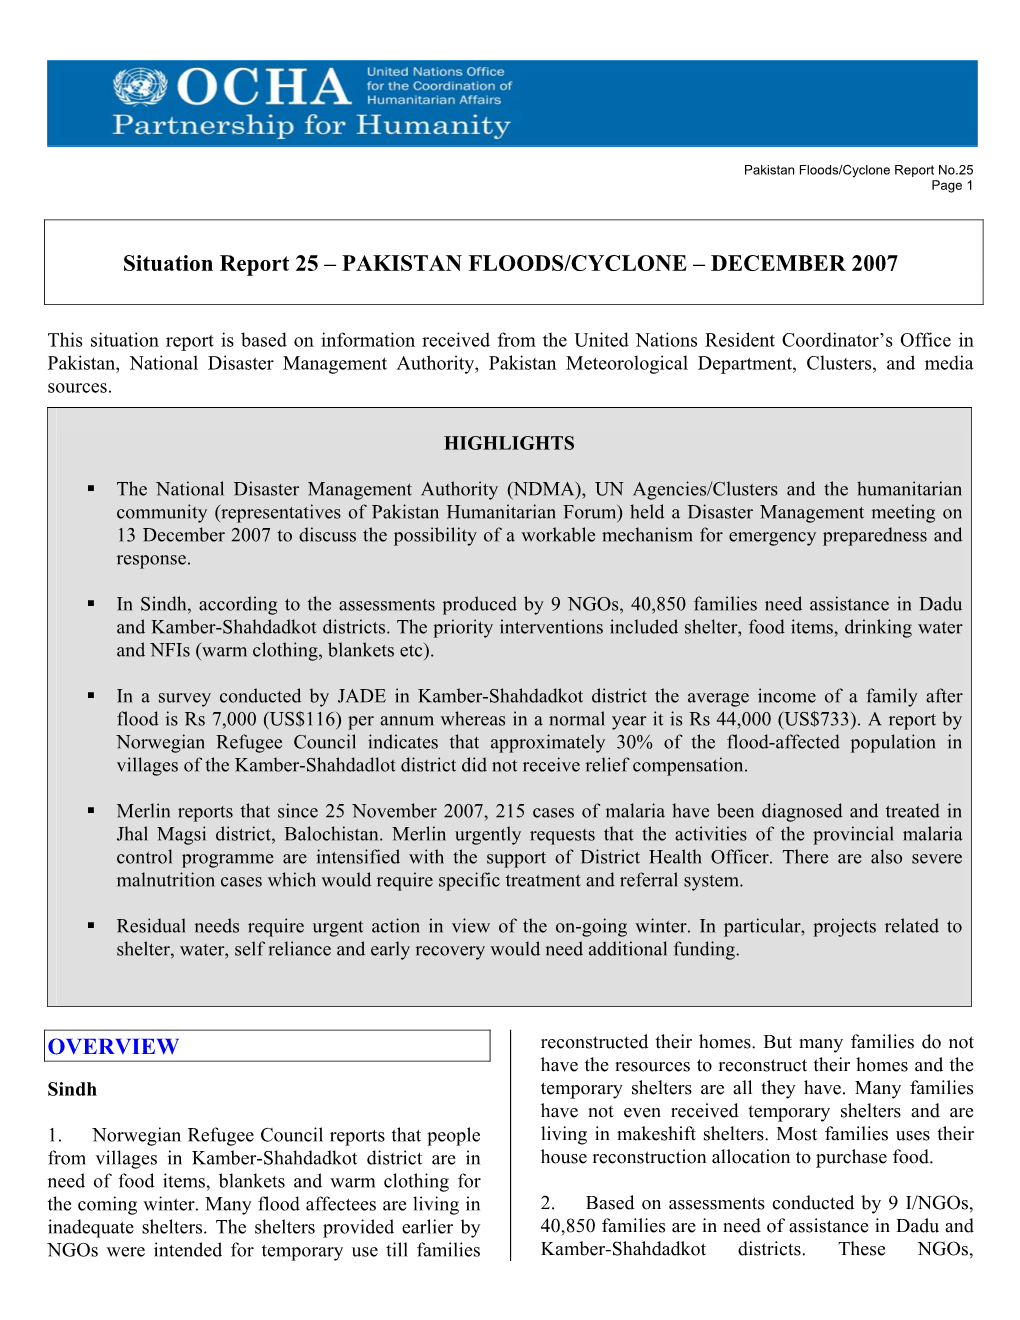 Pakistan Floods/Cyclone Report No.25 Page 1